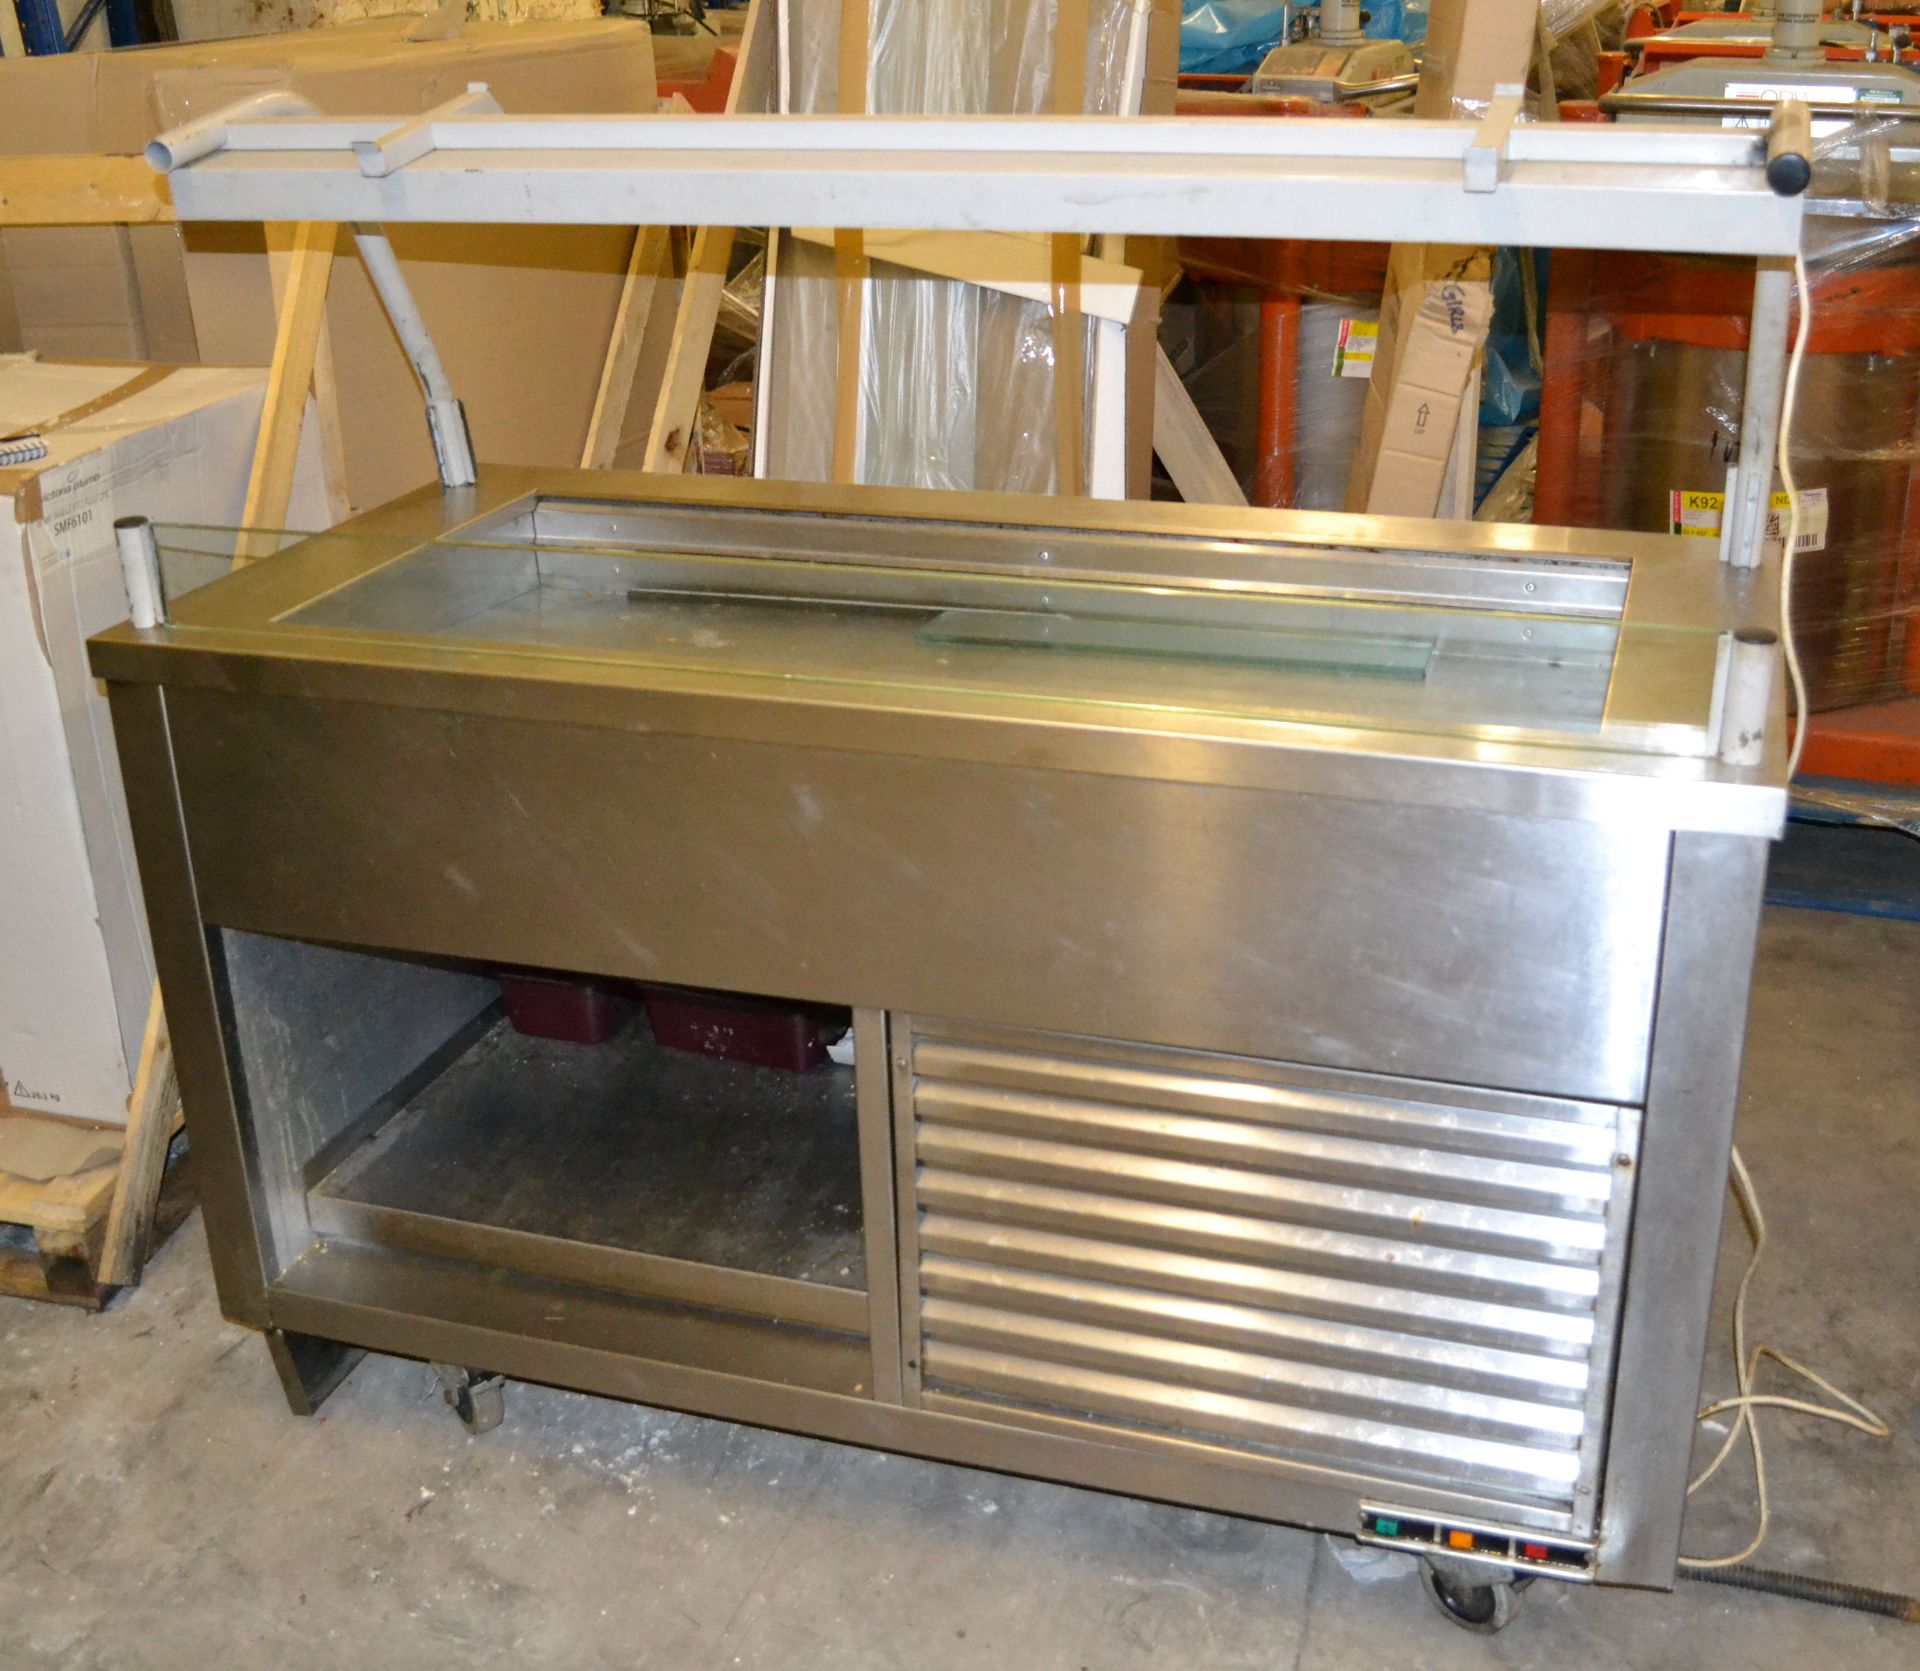 1 x Advanced Catering Equipment 1500BADW 240V Chilled Counter - Details to follow - Ref: FJC011 -